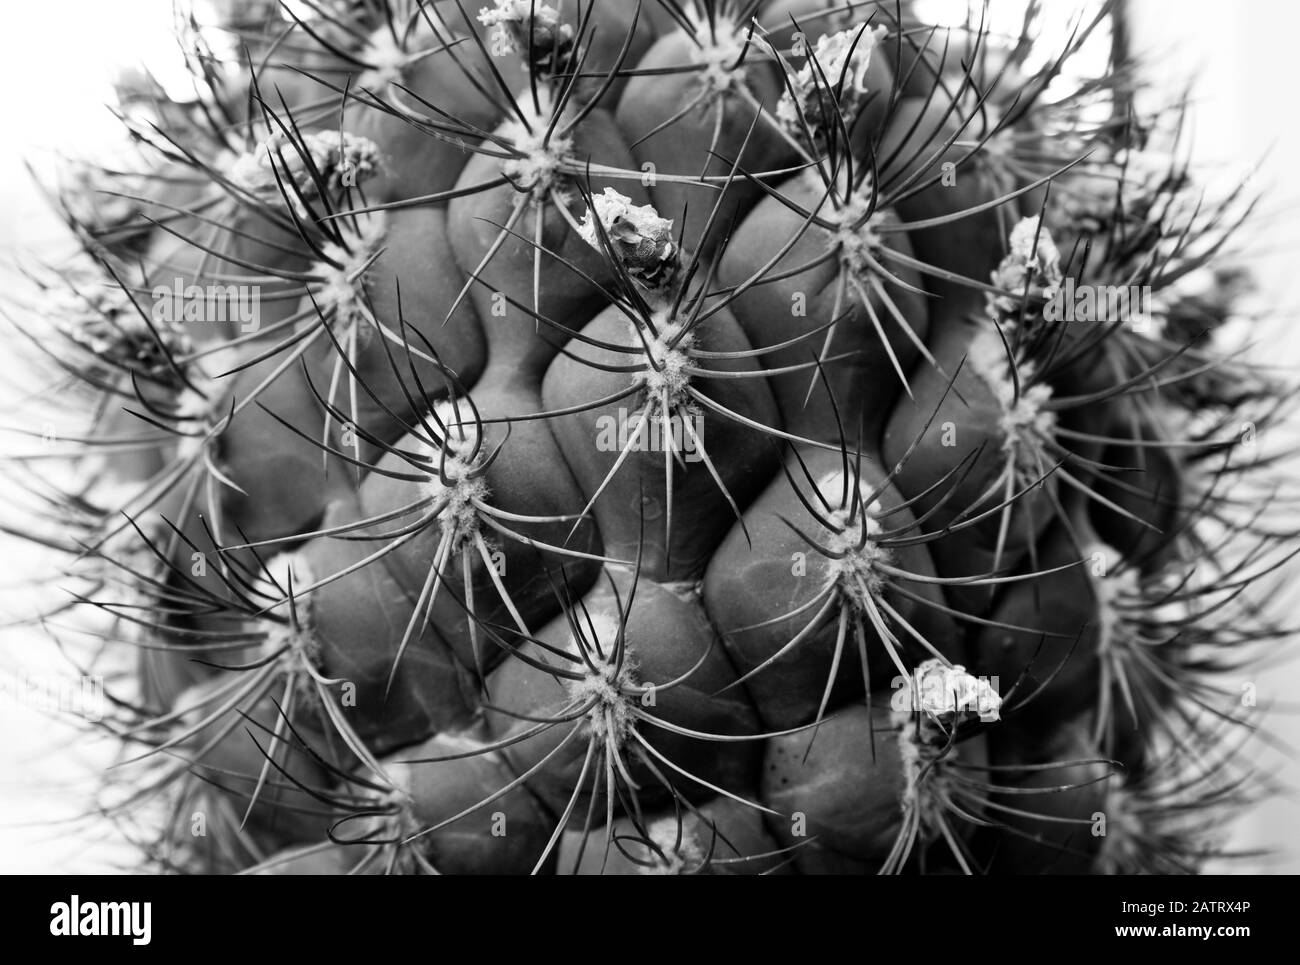 Black and white picture, close up view of barrel cactus and it`s thorns. Concept of danger and threat. Stock Photo